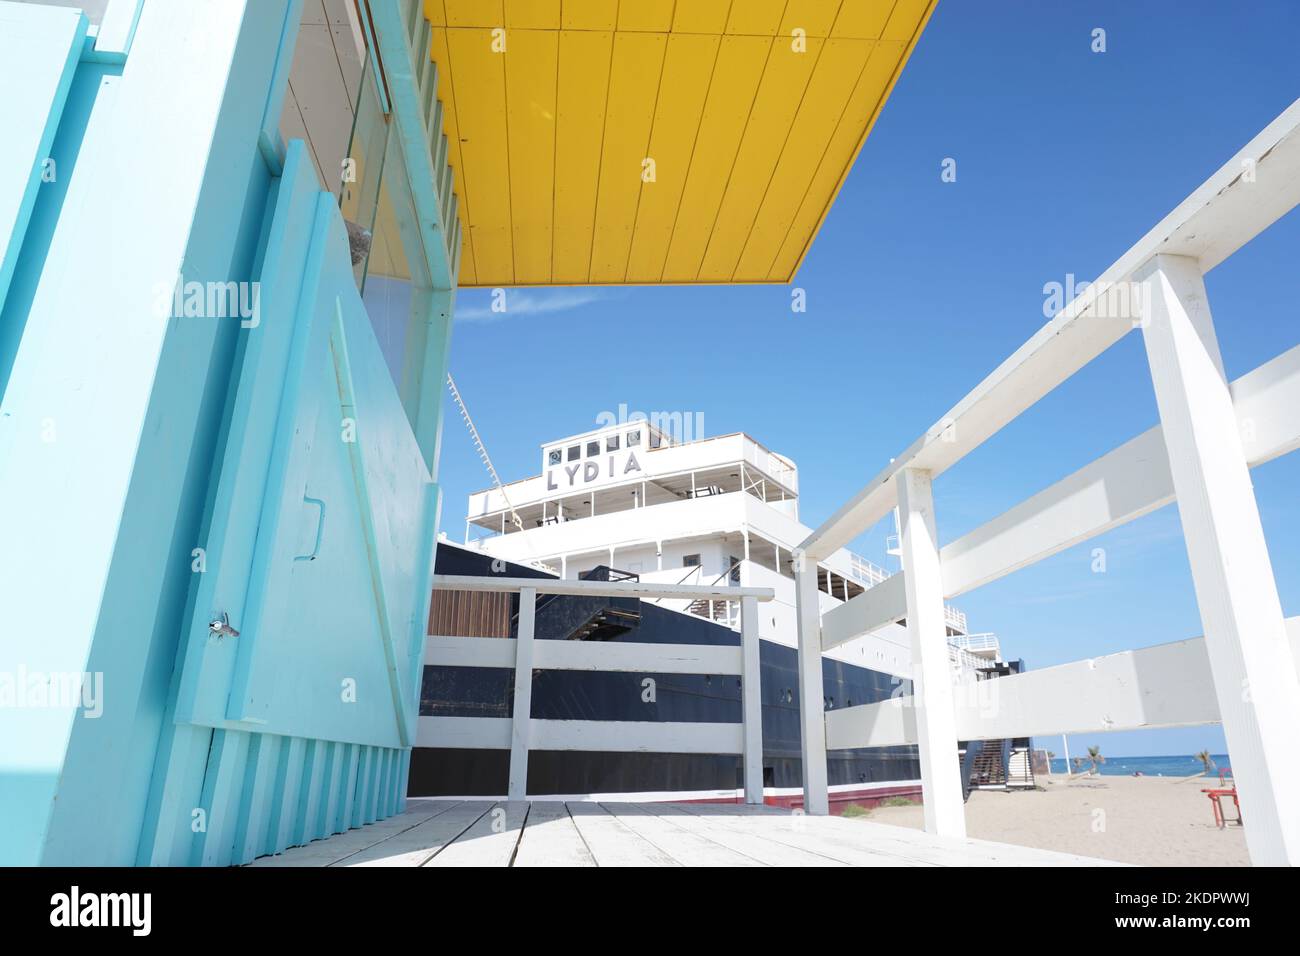 Port-Barcarès, France - October 2022; former cruise ship Le Lydia on beach viewed from brightly coloured lifeguard tower against backdrop of blue sky Stock Photo